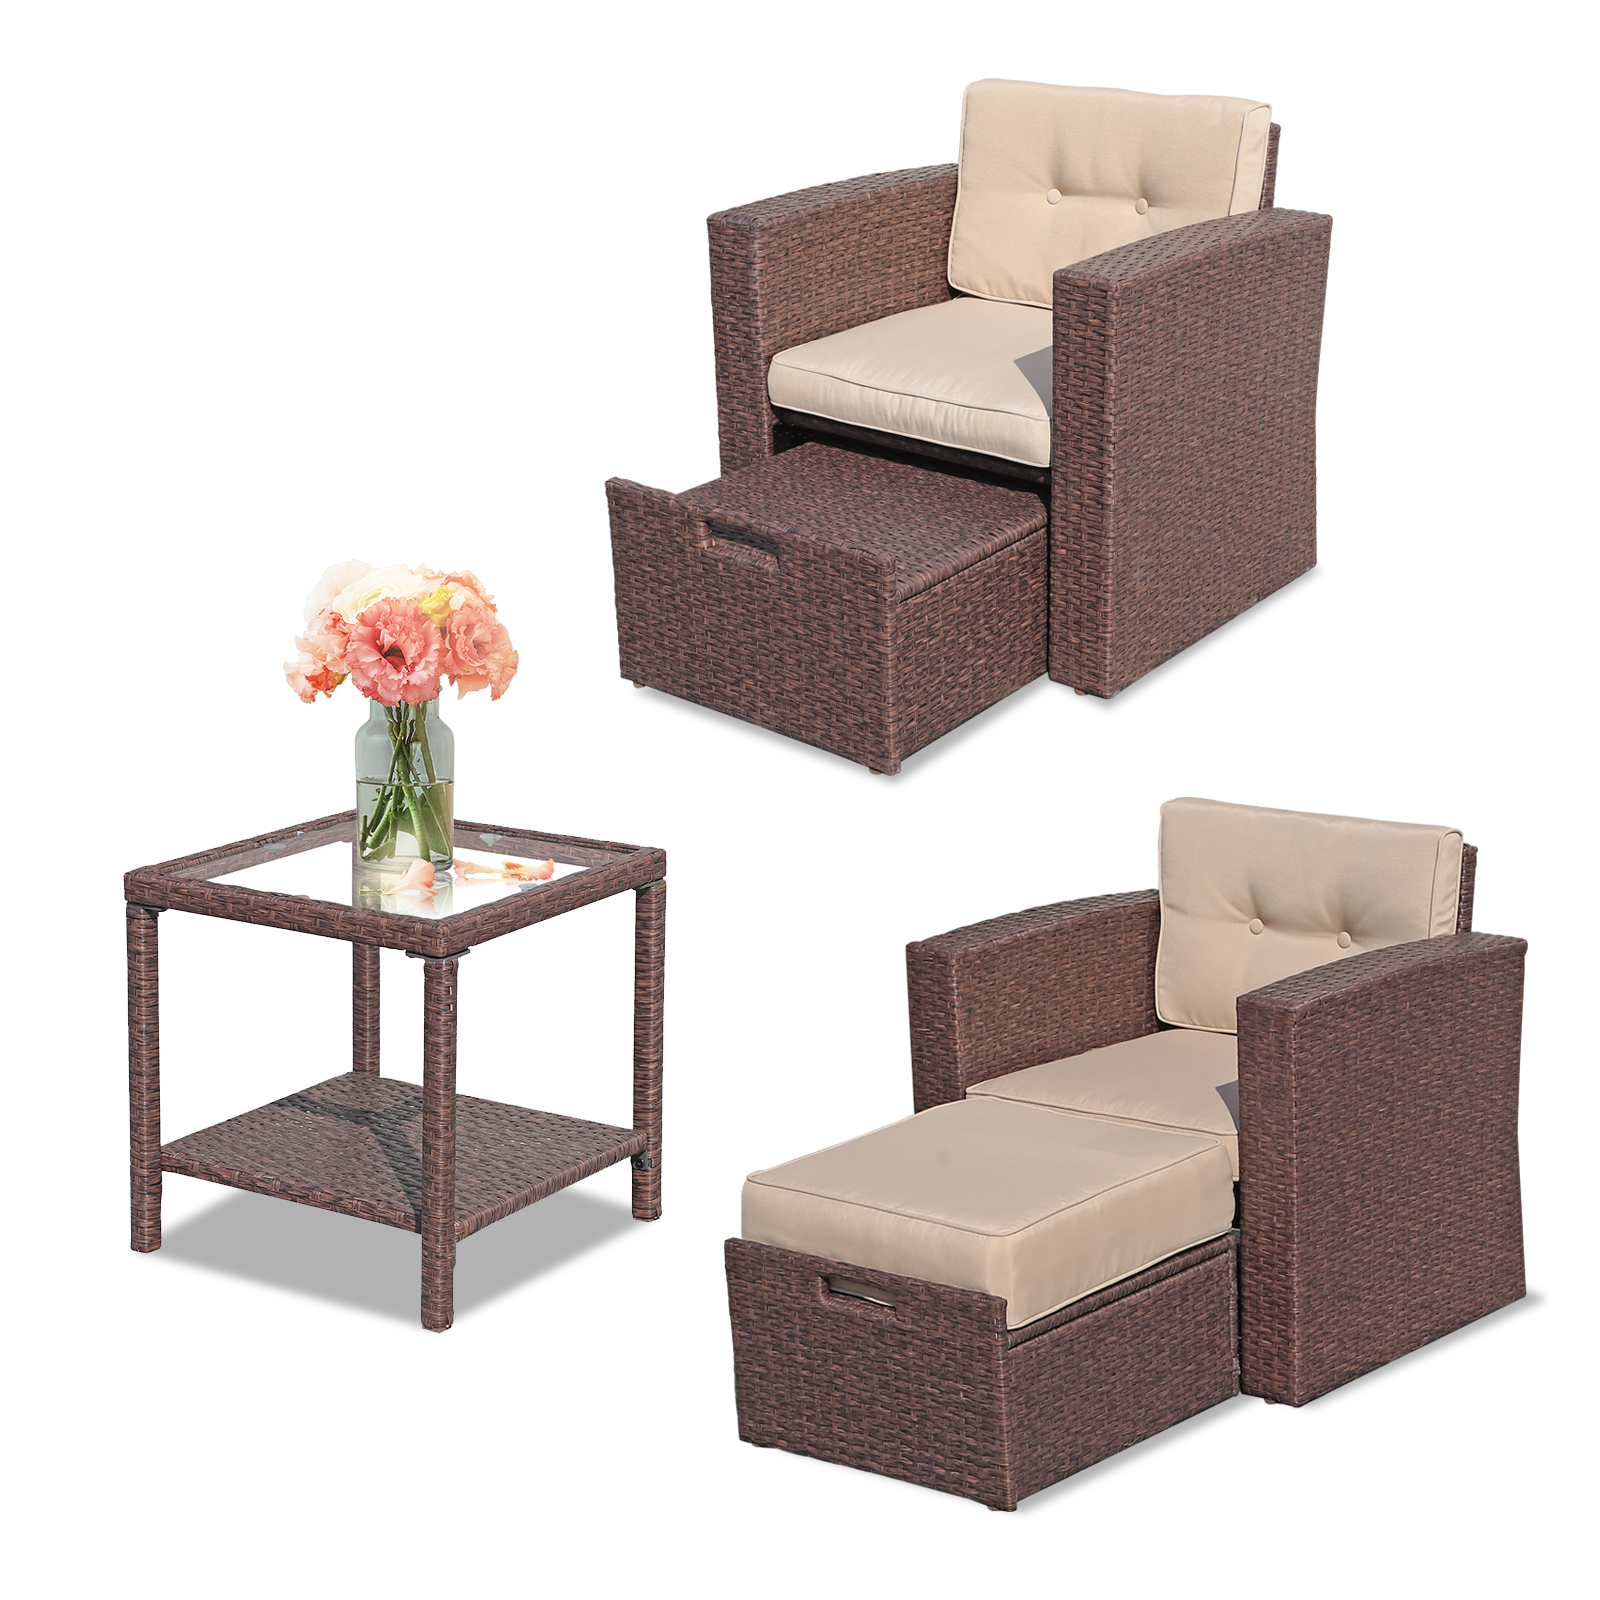 JOIVI 5 Pieces Patio Furniture Set, Outdoor Brown PE Rattan Wicker Patio Conversation Set, Lounge Chairs with Cushioned Ottoman and Tempered Glass Side Table - image 2 of 9